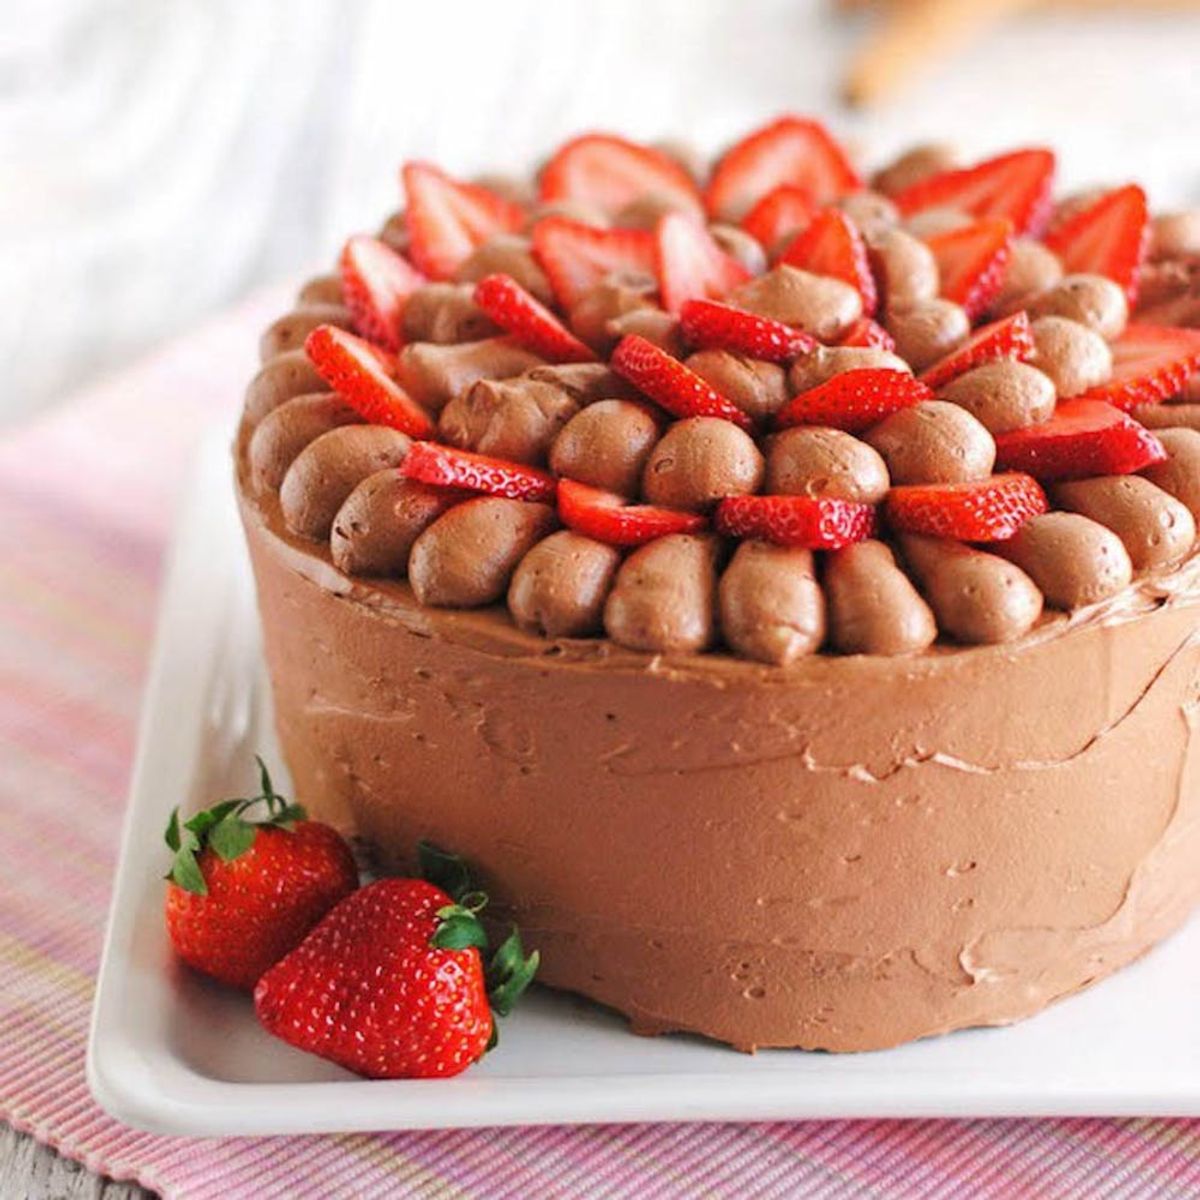 18 Strawberry and Chocolate Desserts to Sweeten Up Your Valentine’s Day